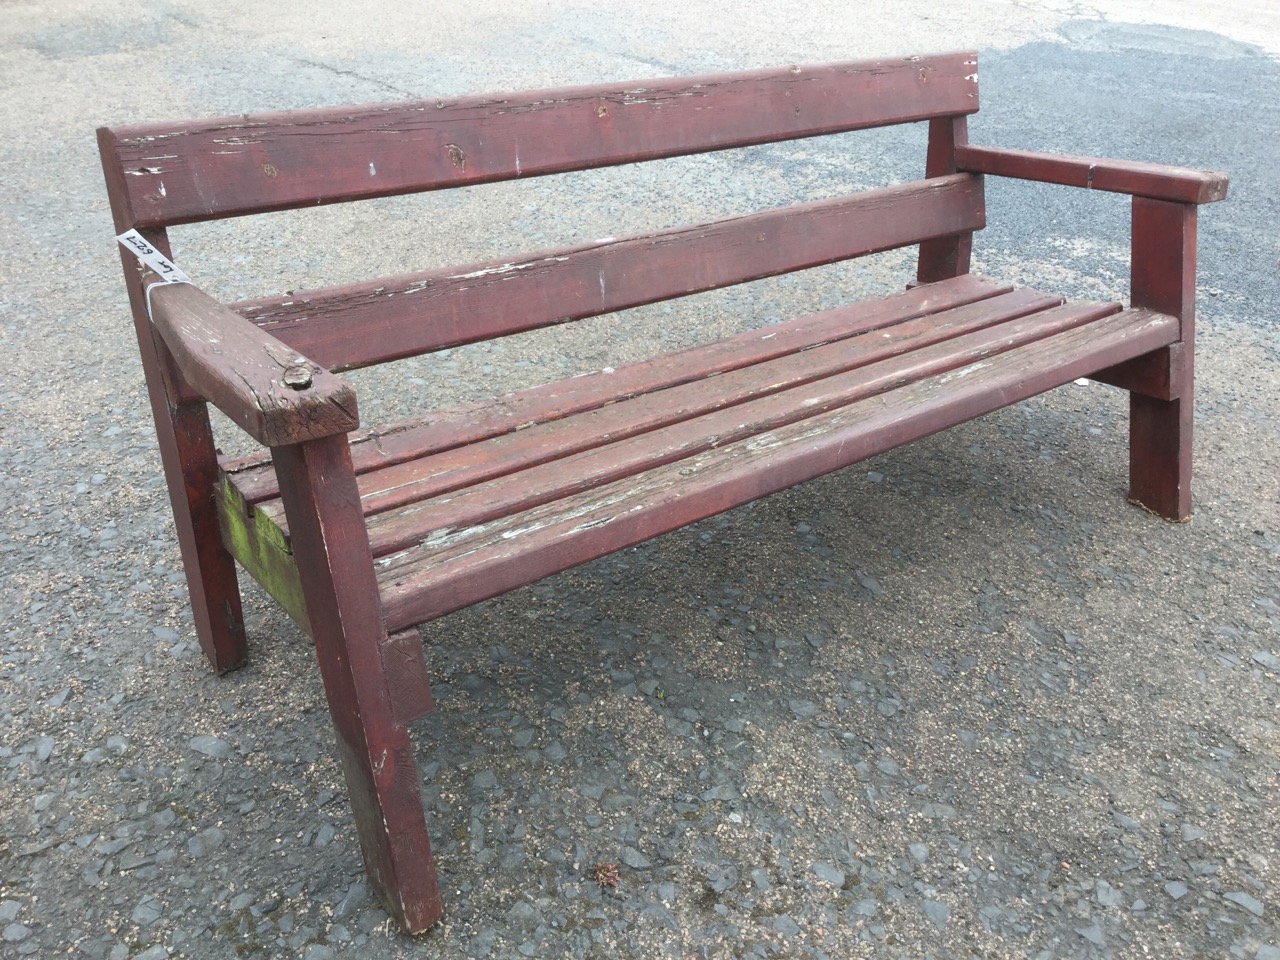 A rectangular garden bench of slatted construction, having platform arms and angled legs. - Image 3 of 3